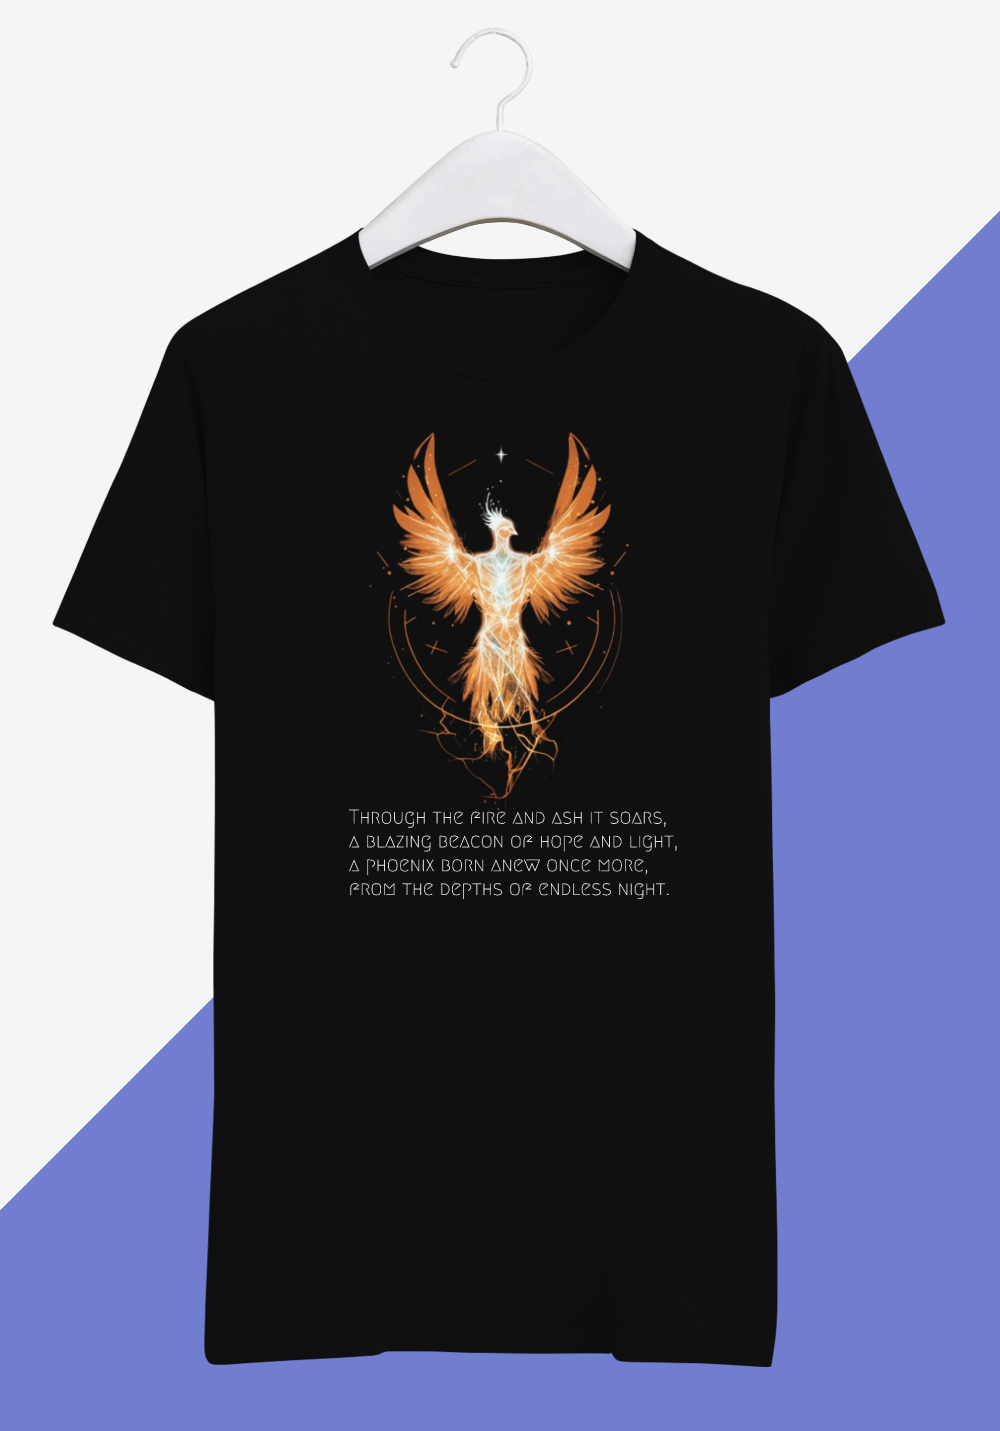 Black And Trippy Shirts Rise From The Ashes Short Sleeve T shirt